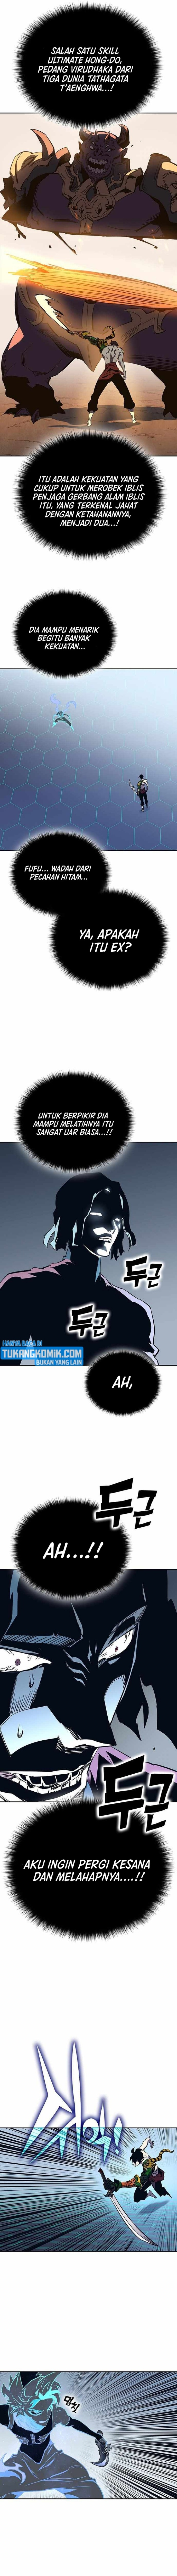 x-ash Chapter 64